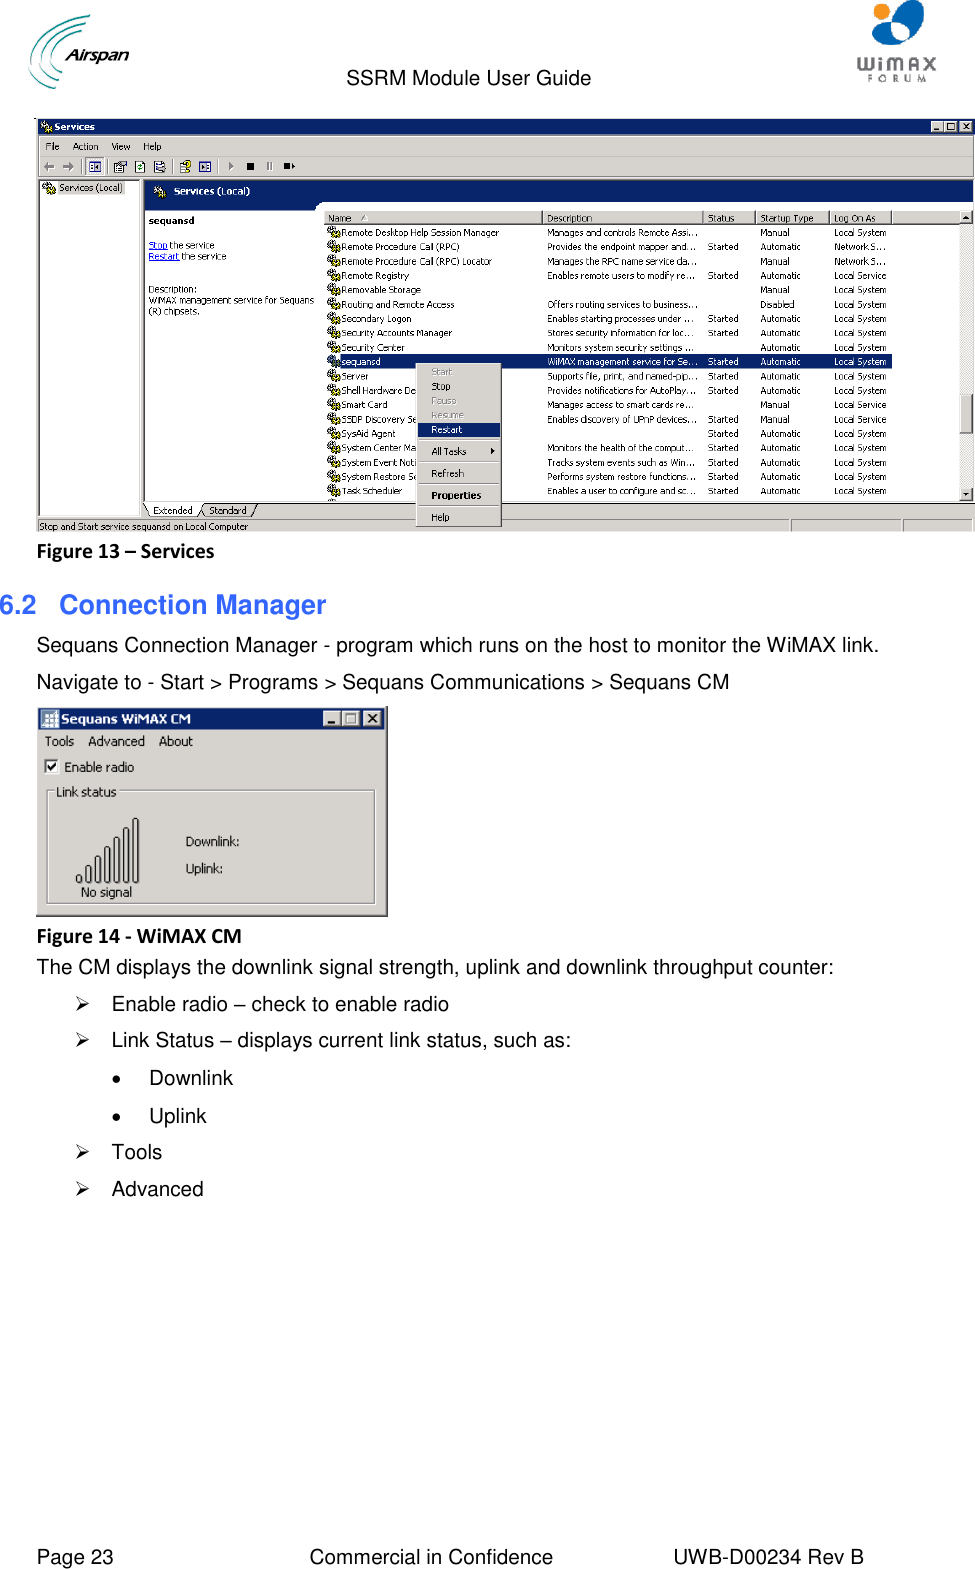                                  SSRM Module User Guide     Page 23  Commercial in Confidence  UWB-D00234 Rev B     Figure 13 – Services 6.2 Connection Manager Sequans Connection Manager - program which runs on the host to monitor the WiMAX link. Navigate to - Start &gt; Programs &gt; Sequans Communications &gt; Sequans CM  Figure 14 - WiMAX CM The CM displays the downlink signal strength, uplink and downlink throughput counter:   Enable radio – check to enable radio   Link Status – displays current link status, such as:   Downlink   Uplink   Tools   Advanced   